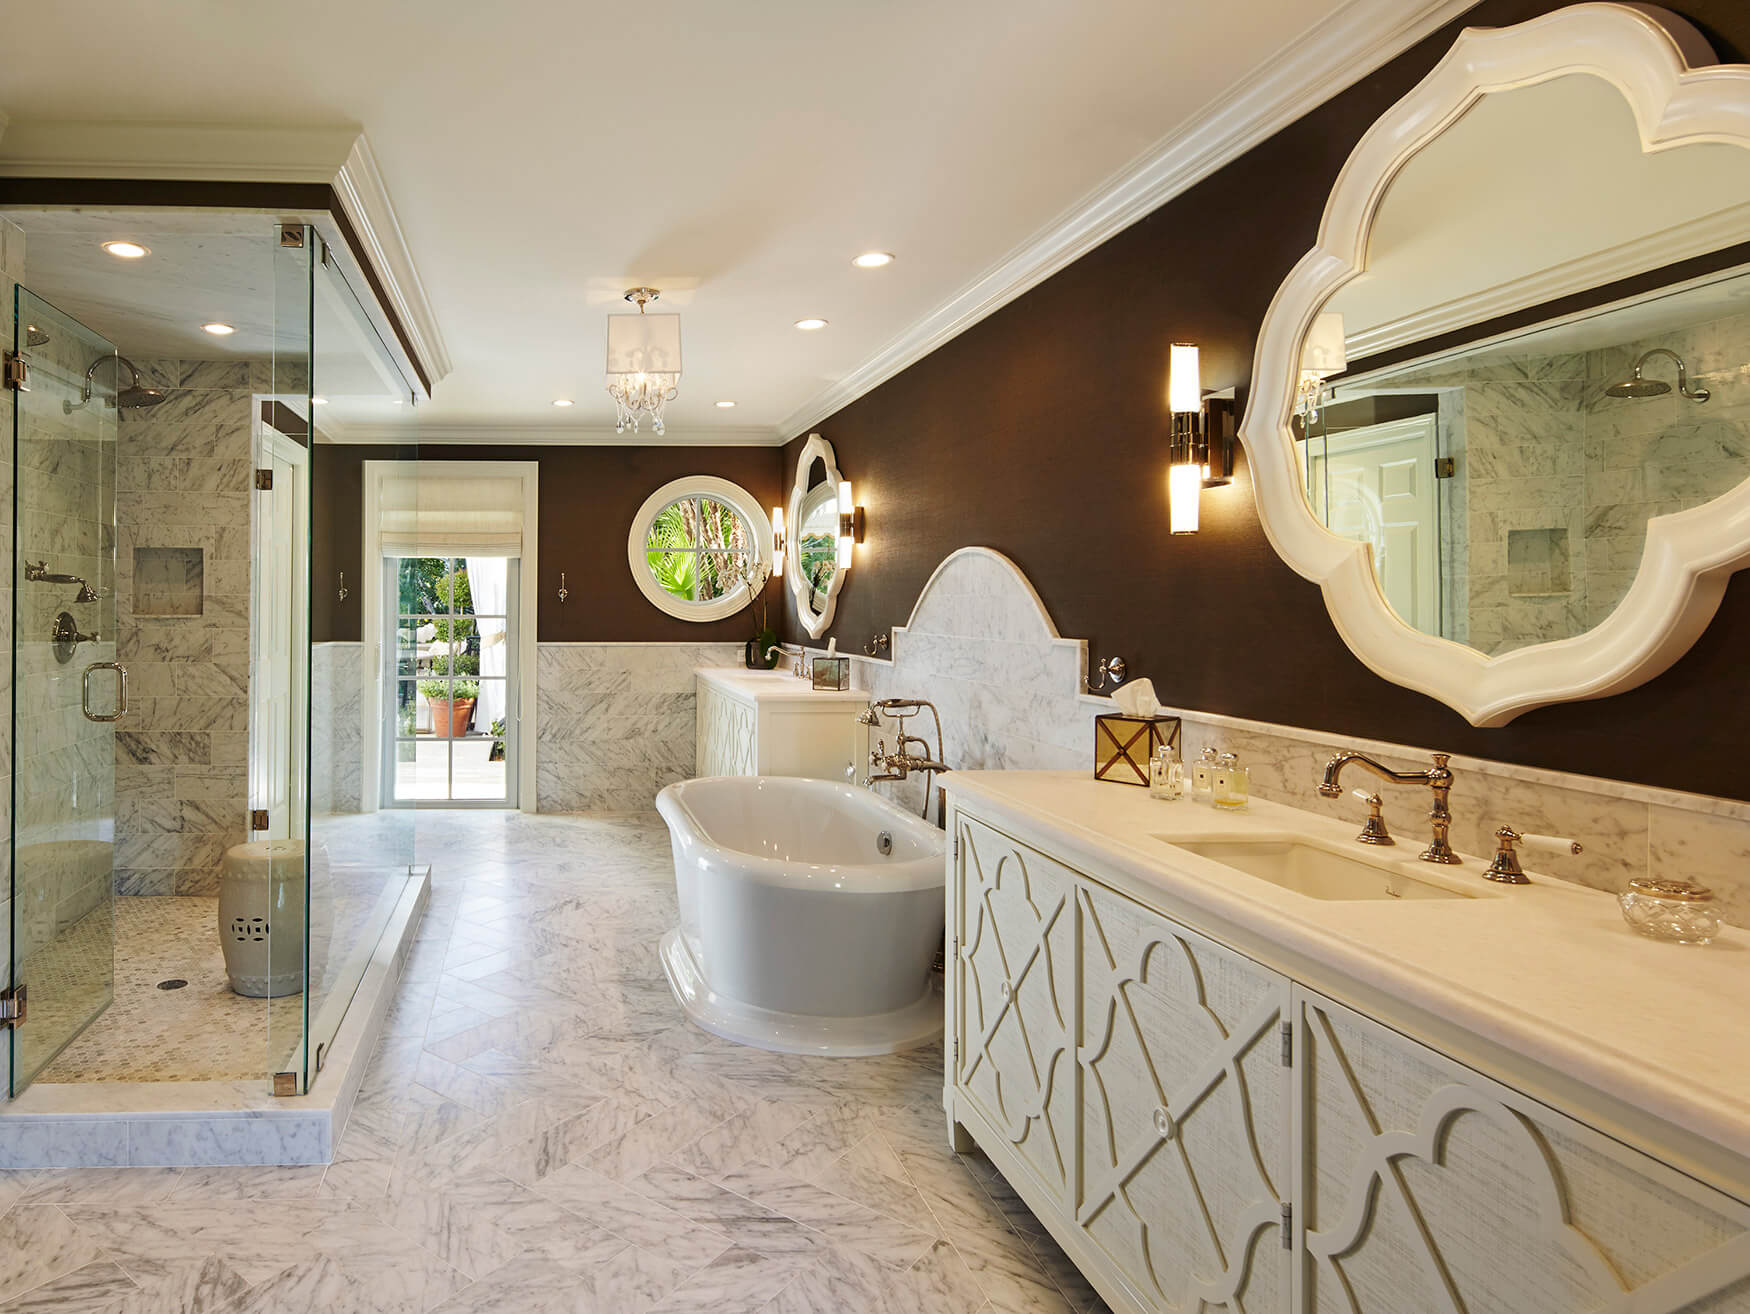 A bathroom with a large mirror and a white sink.